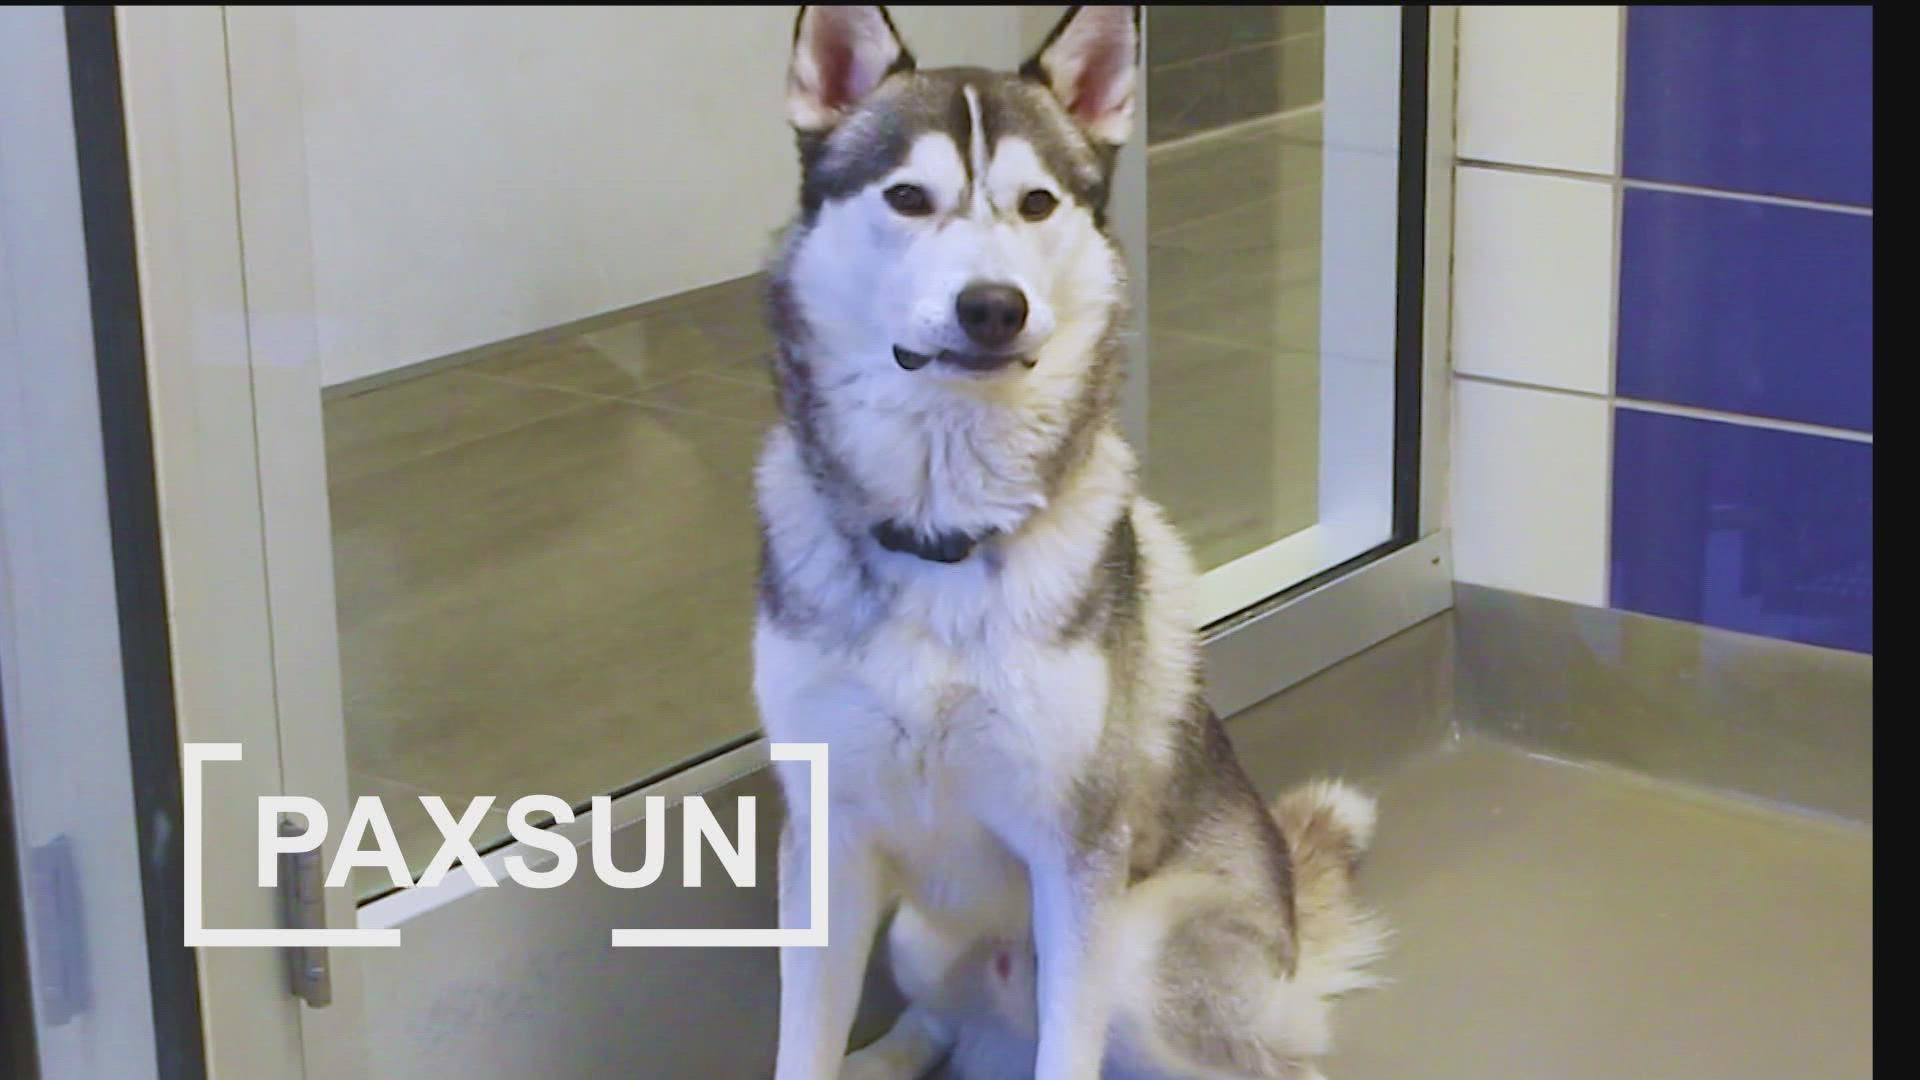 The SPCA of Texas is holding a big adoption event. Paxsun is a 1-year-old male Husky mix and is $25 to adopt.